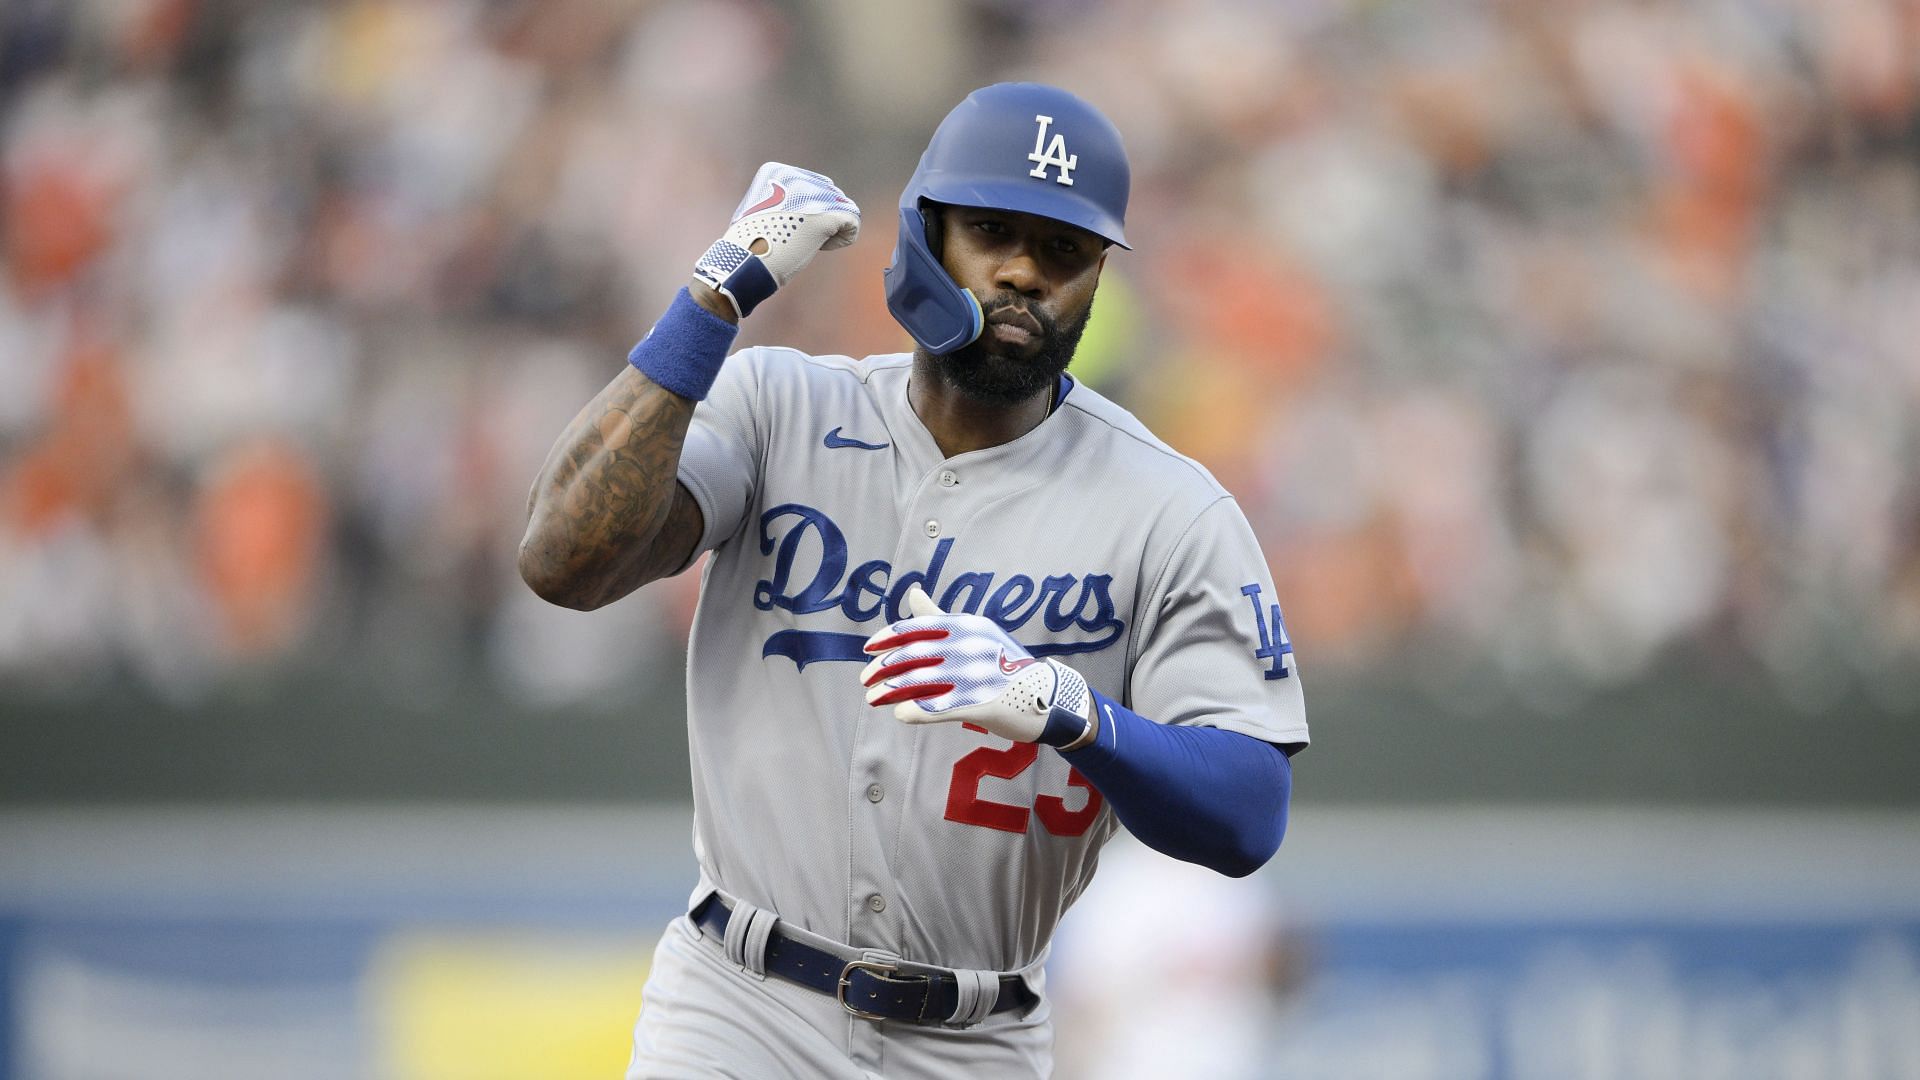 Jason Heyward is back with the Dodgers